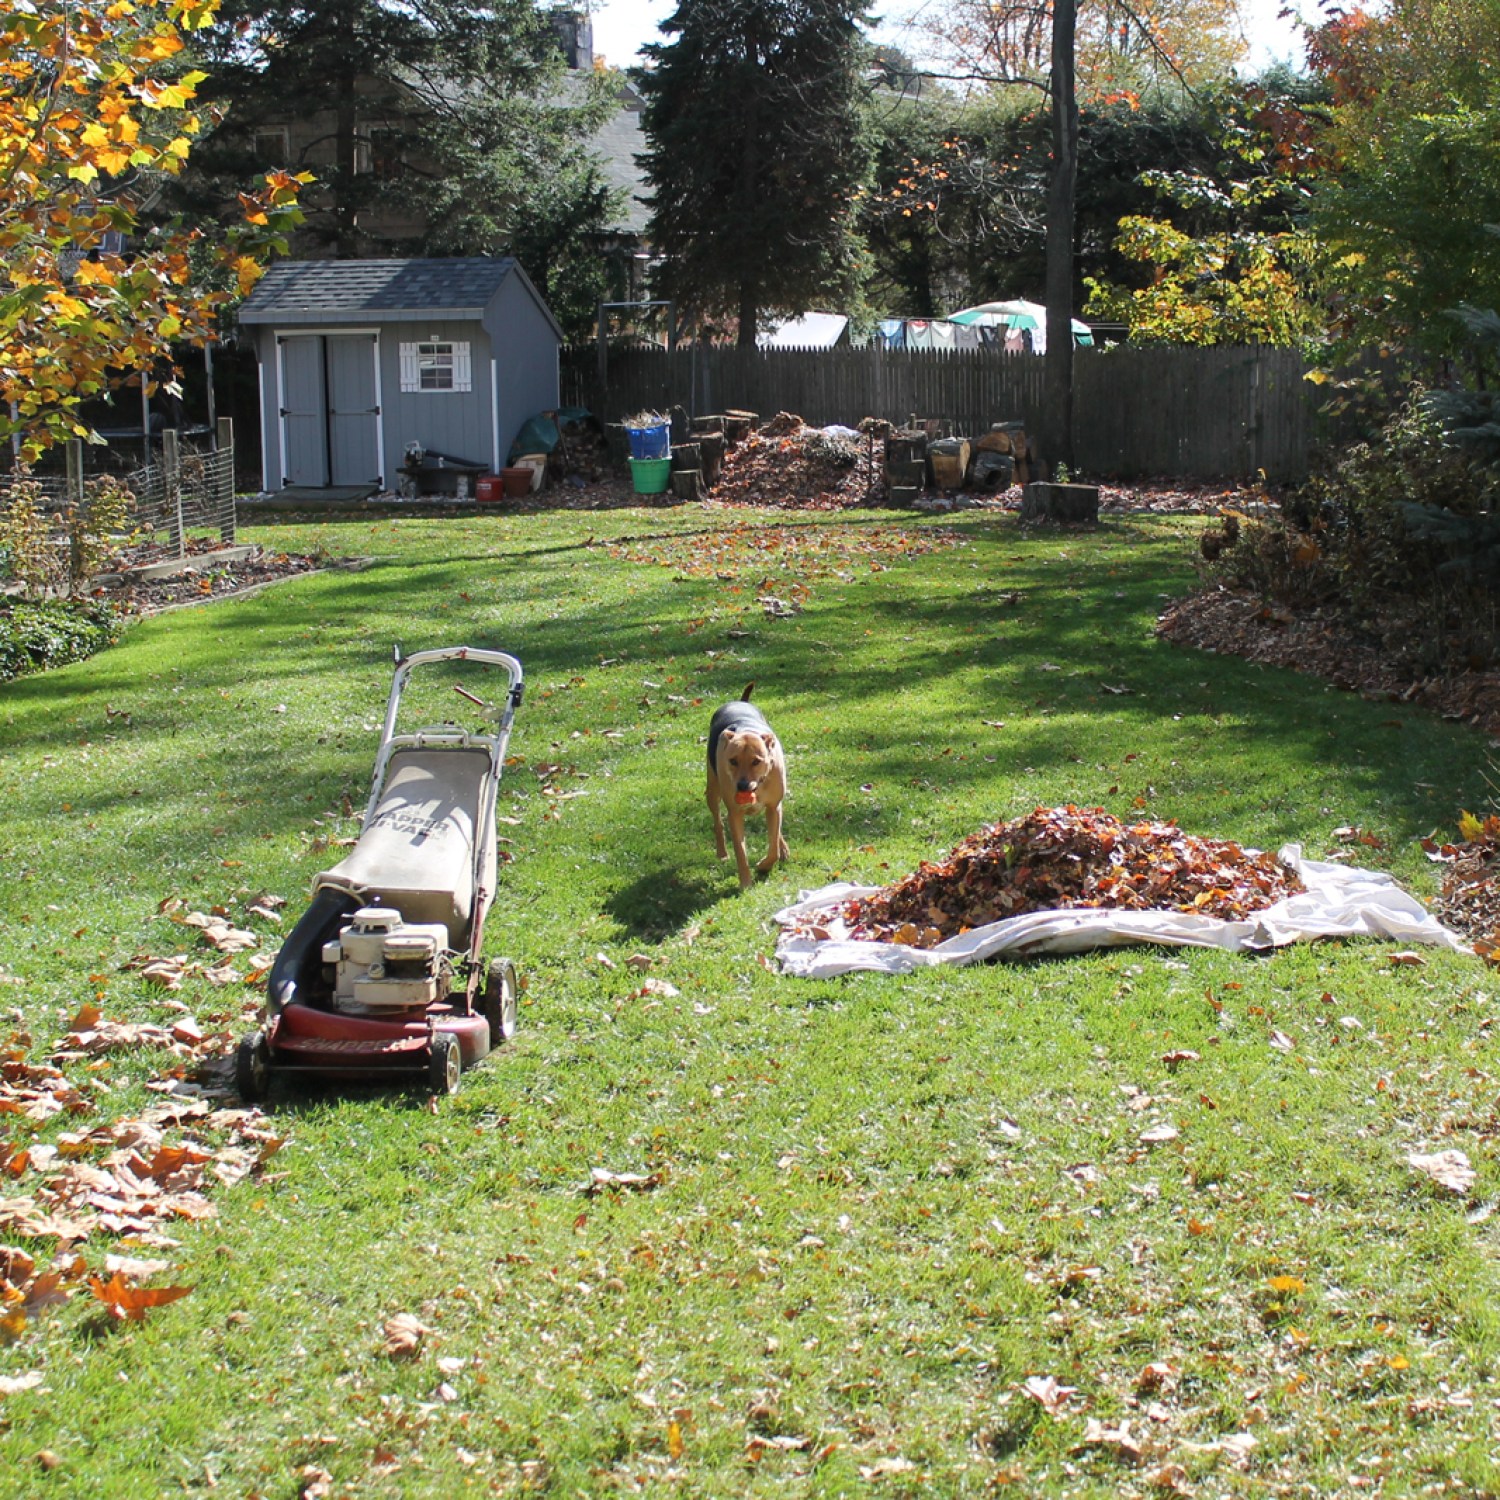 Dog hanging out during fall lawn cleanup